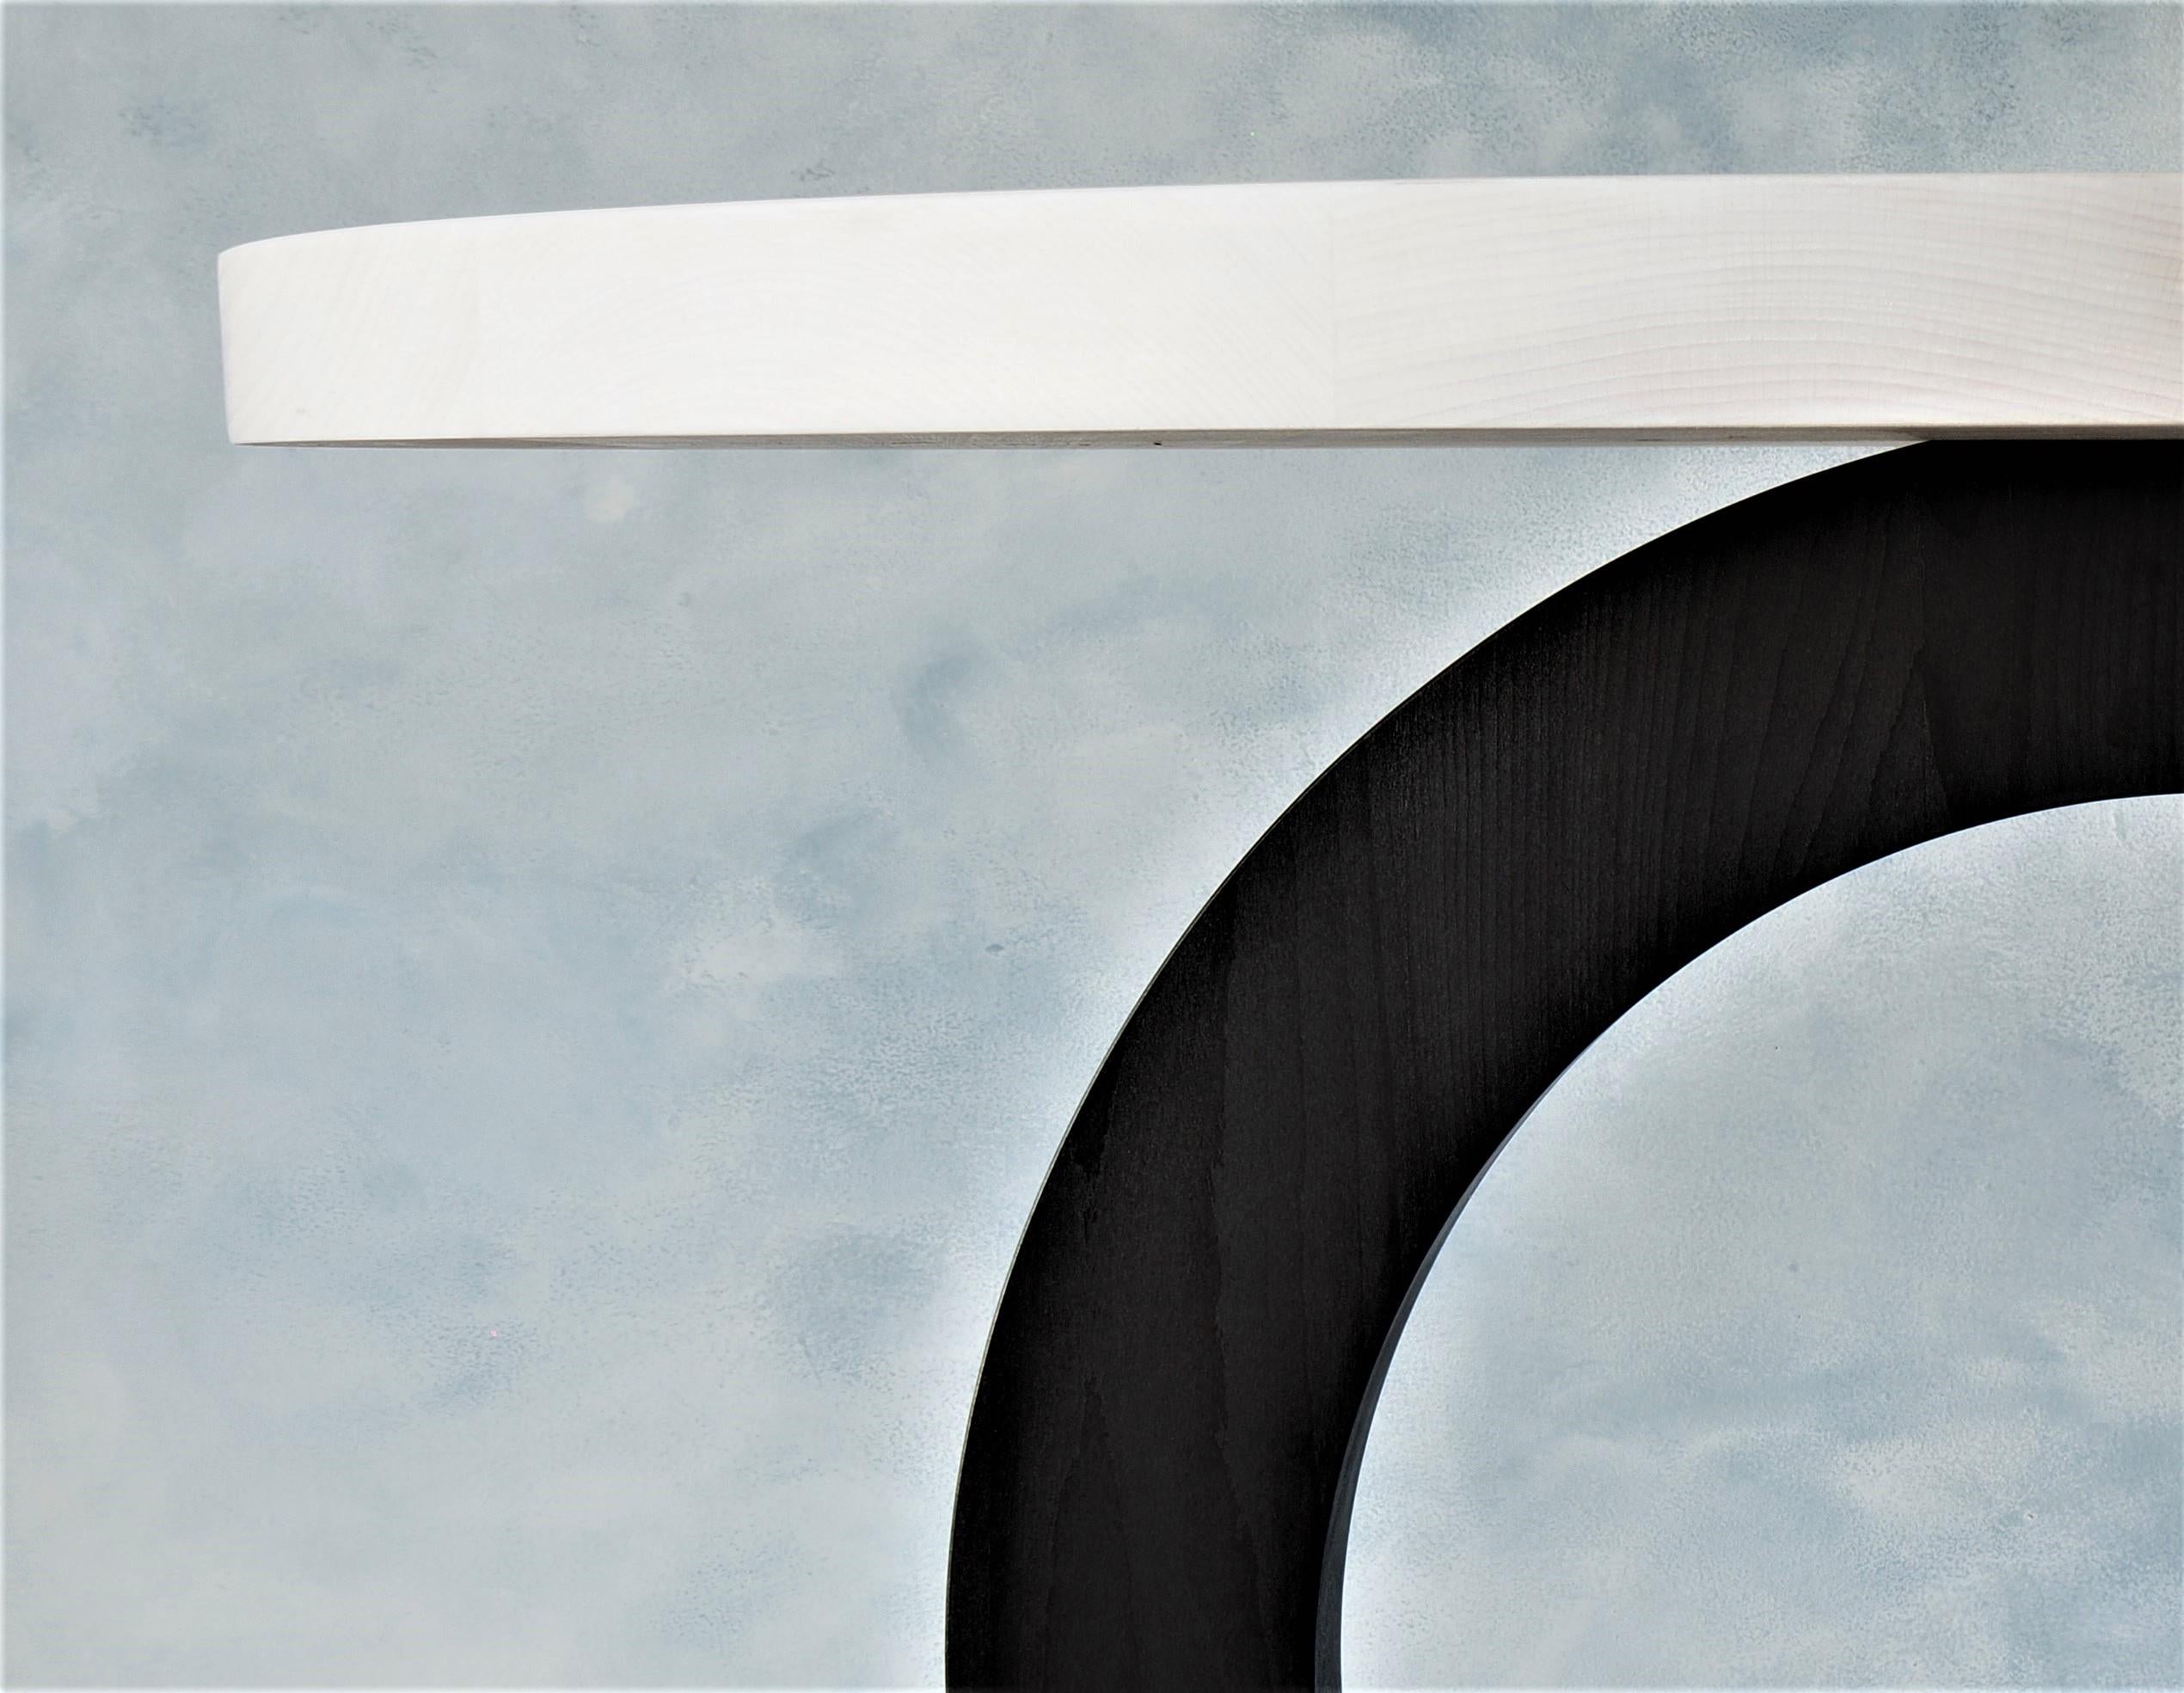 North American India Ink and White Round Dual Crescent Table by MSJ Furniture Studio